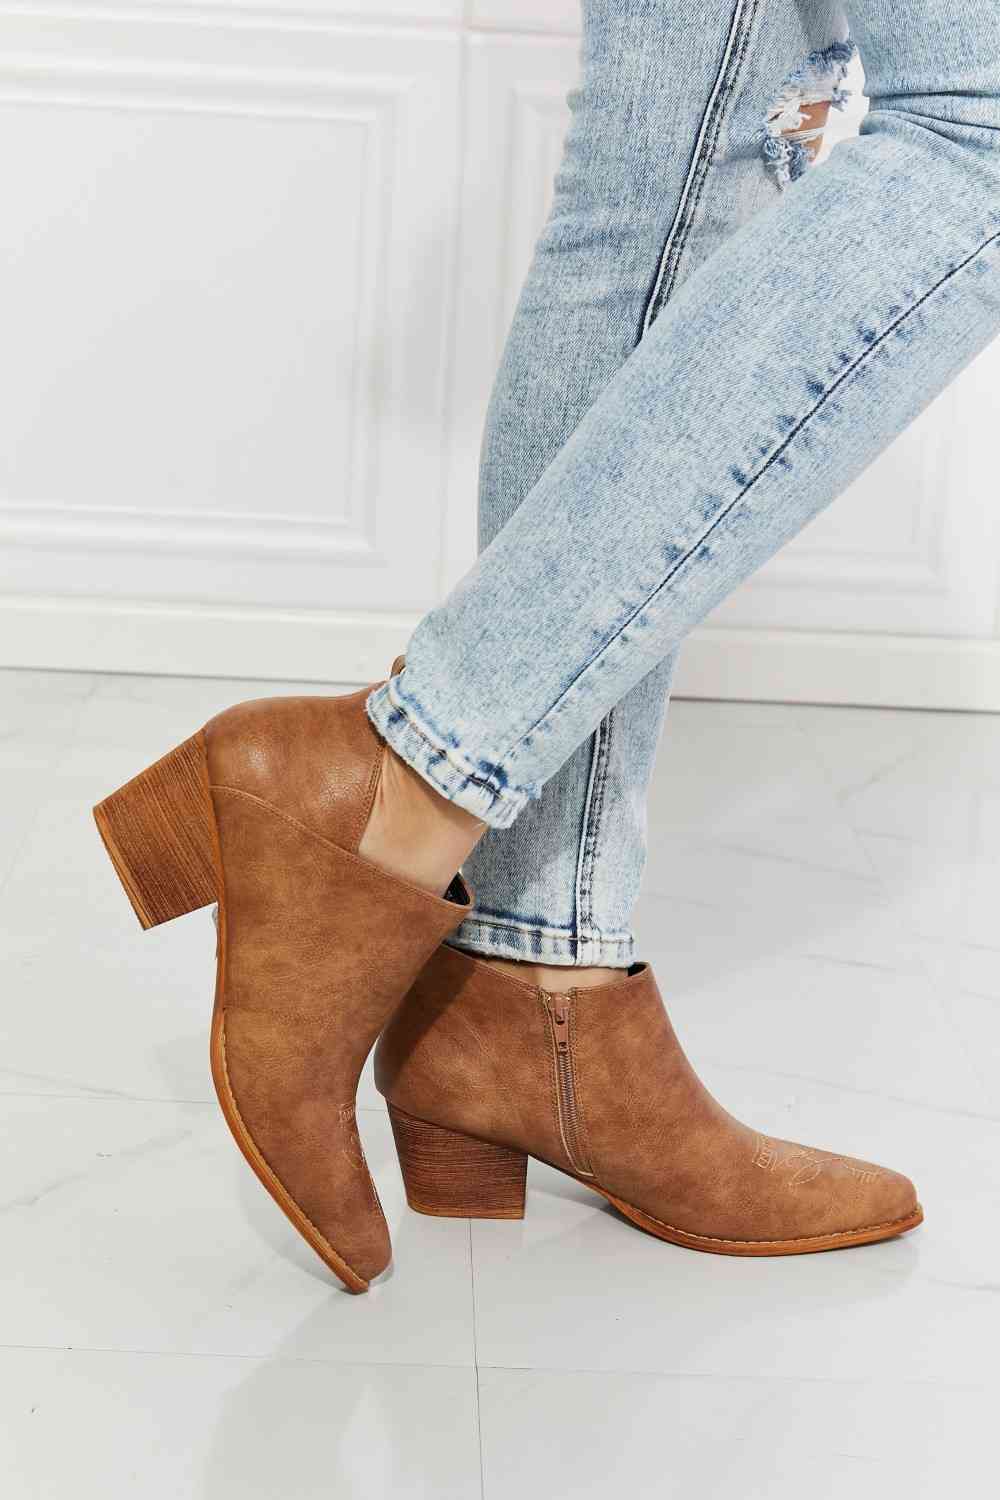 MMShoes Trust Yourself Embroidered Crossover Cowboy Bootie - Caramel